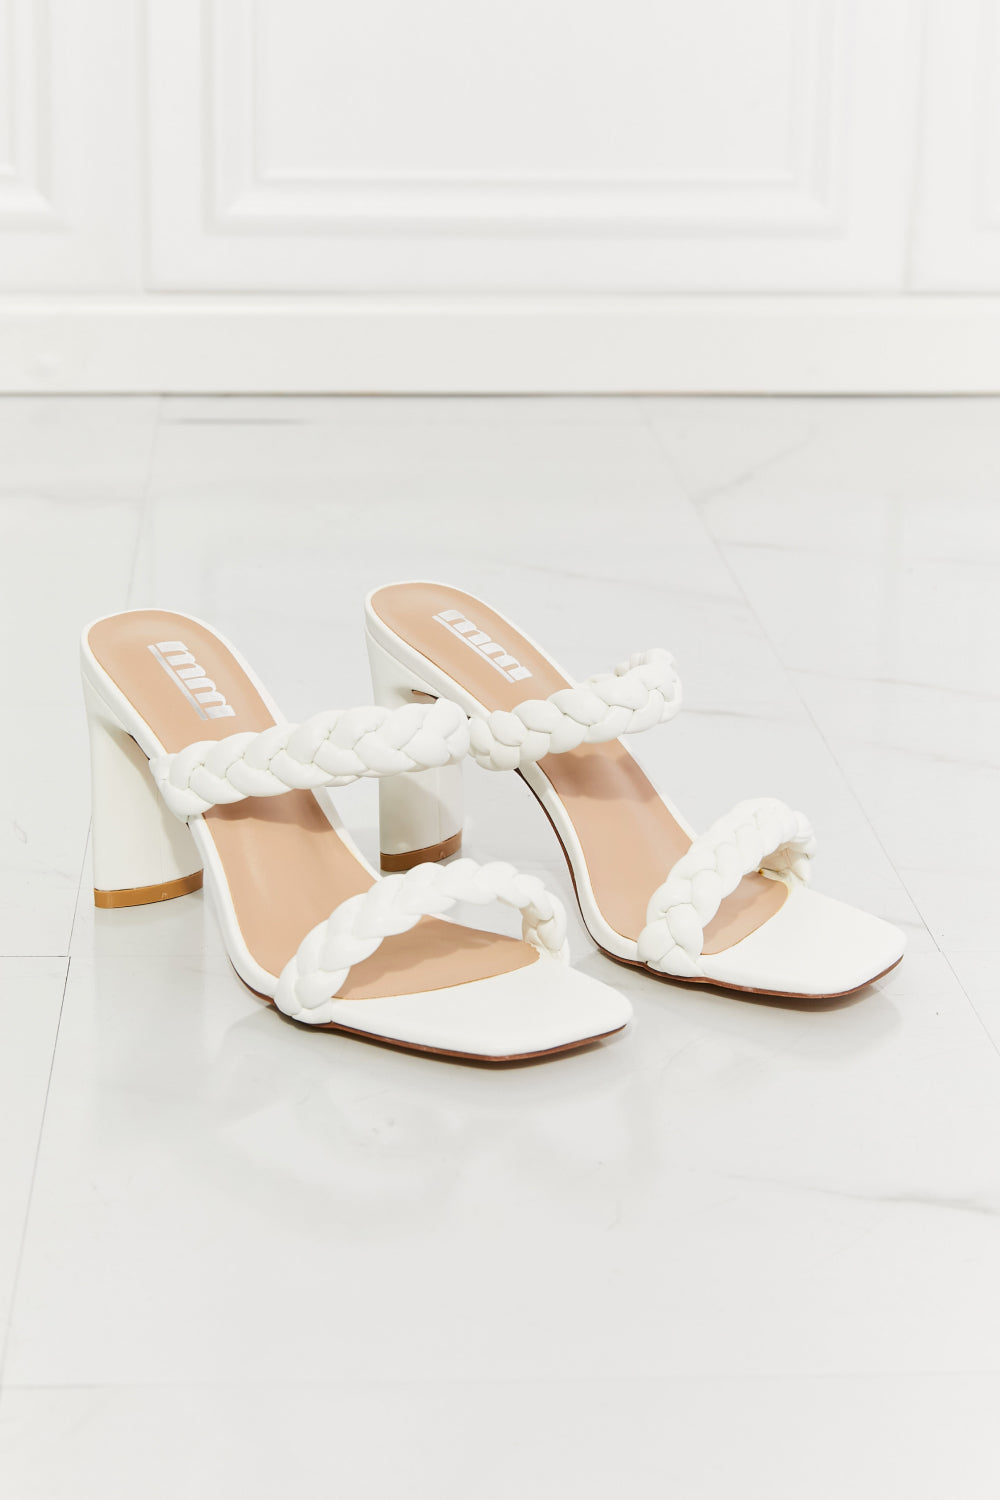 MMShoes In Love Double Braided Block Heel Sandal in White - The Fashion Unicorn